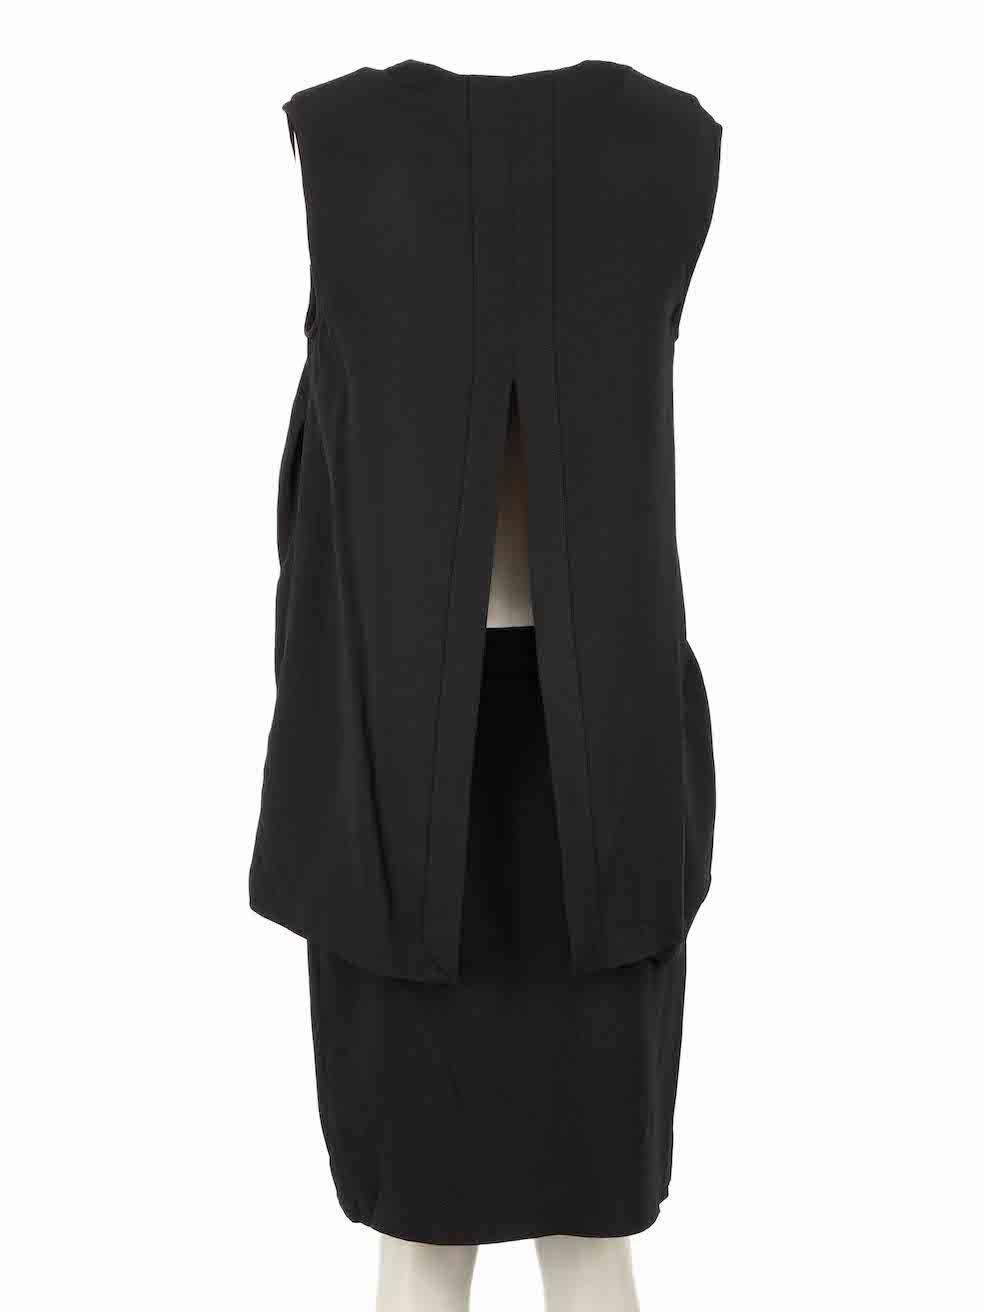 Stella McCartney Black Back Slit Mini Dress Size S In Excellent Condition In London, GB